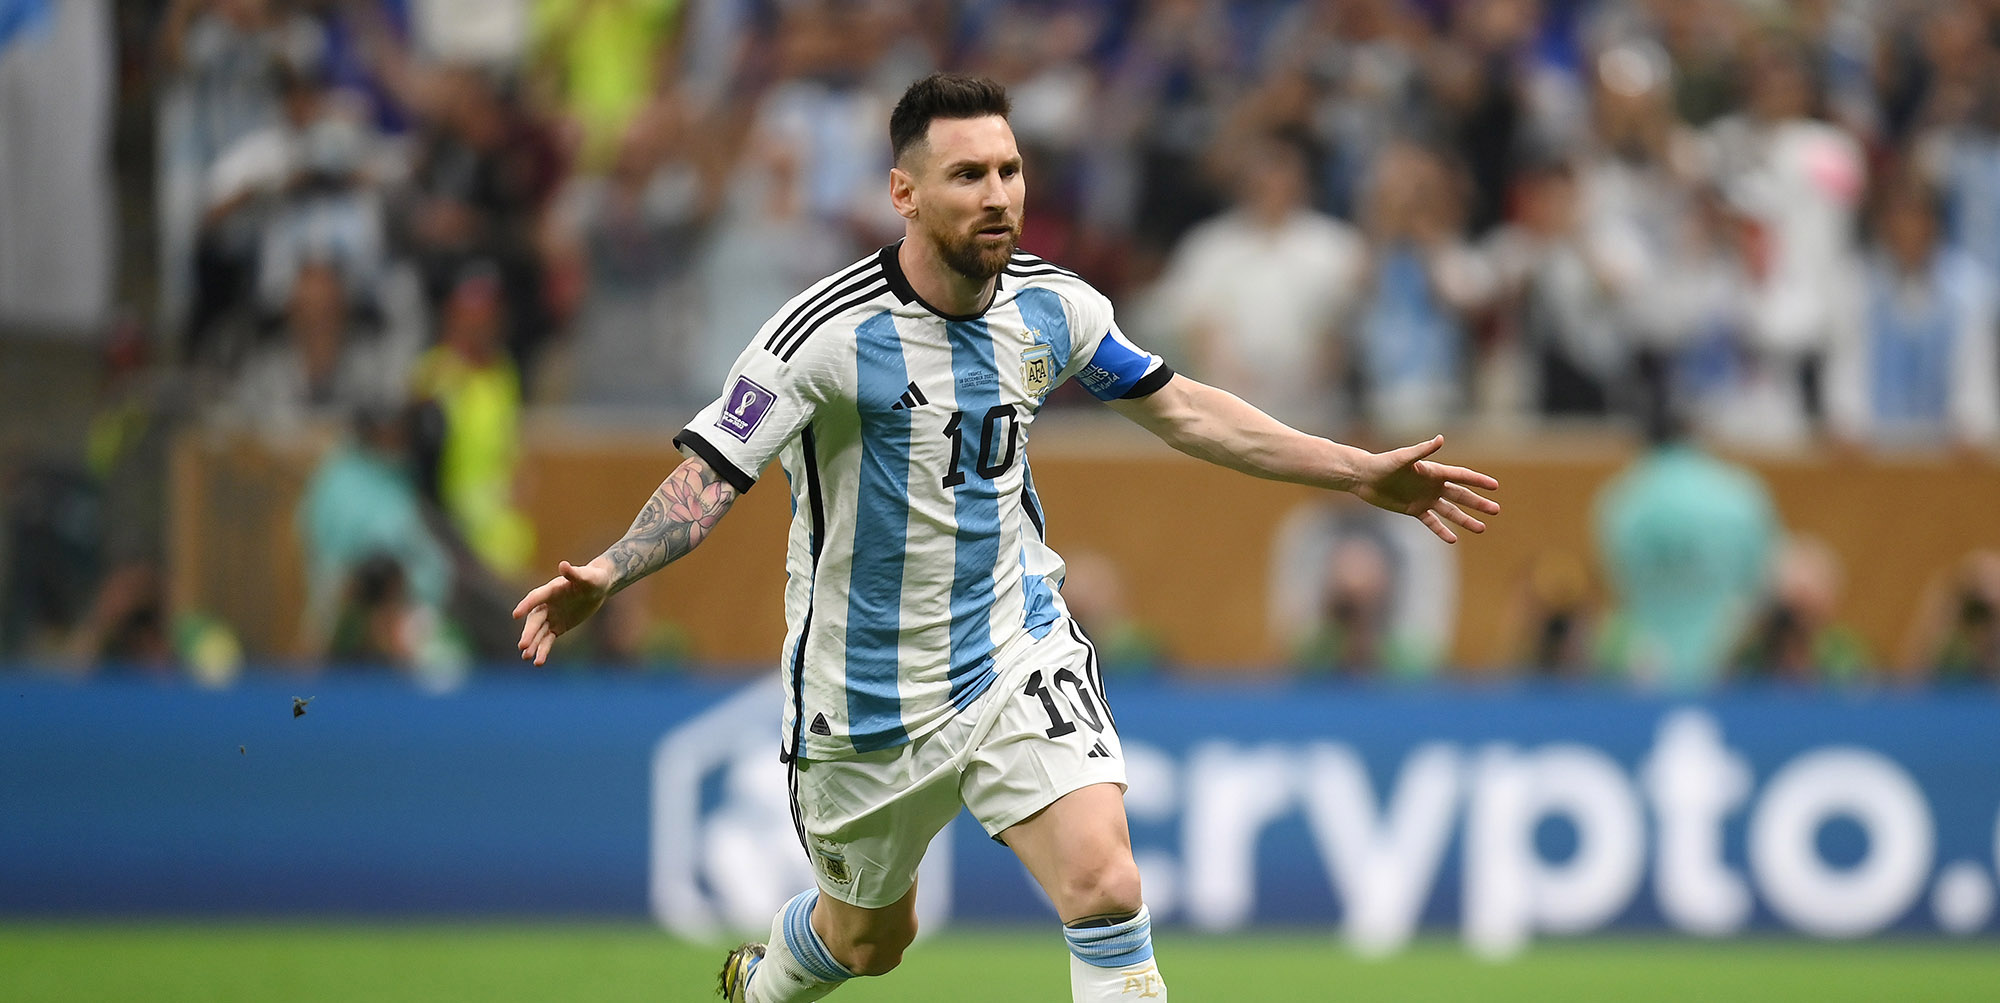 Fans who tuned in to watch Lionel Messi and Argentina battle France in the World Cup final also got an eyeful of Crypto.com’s logo.